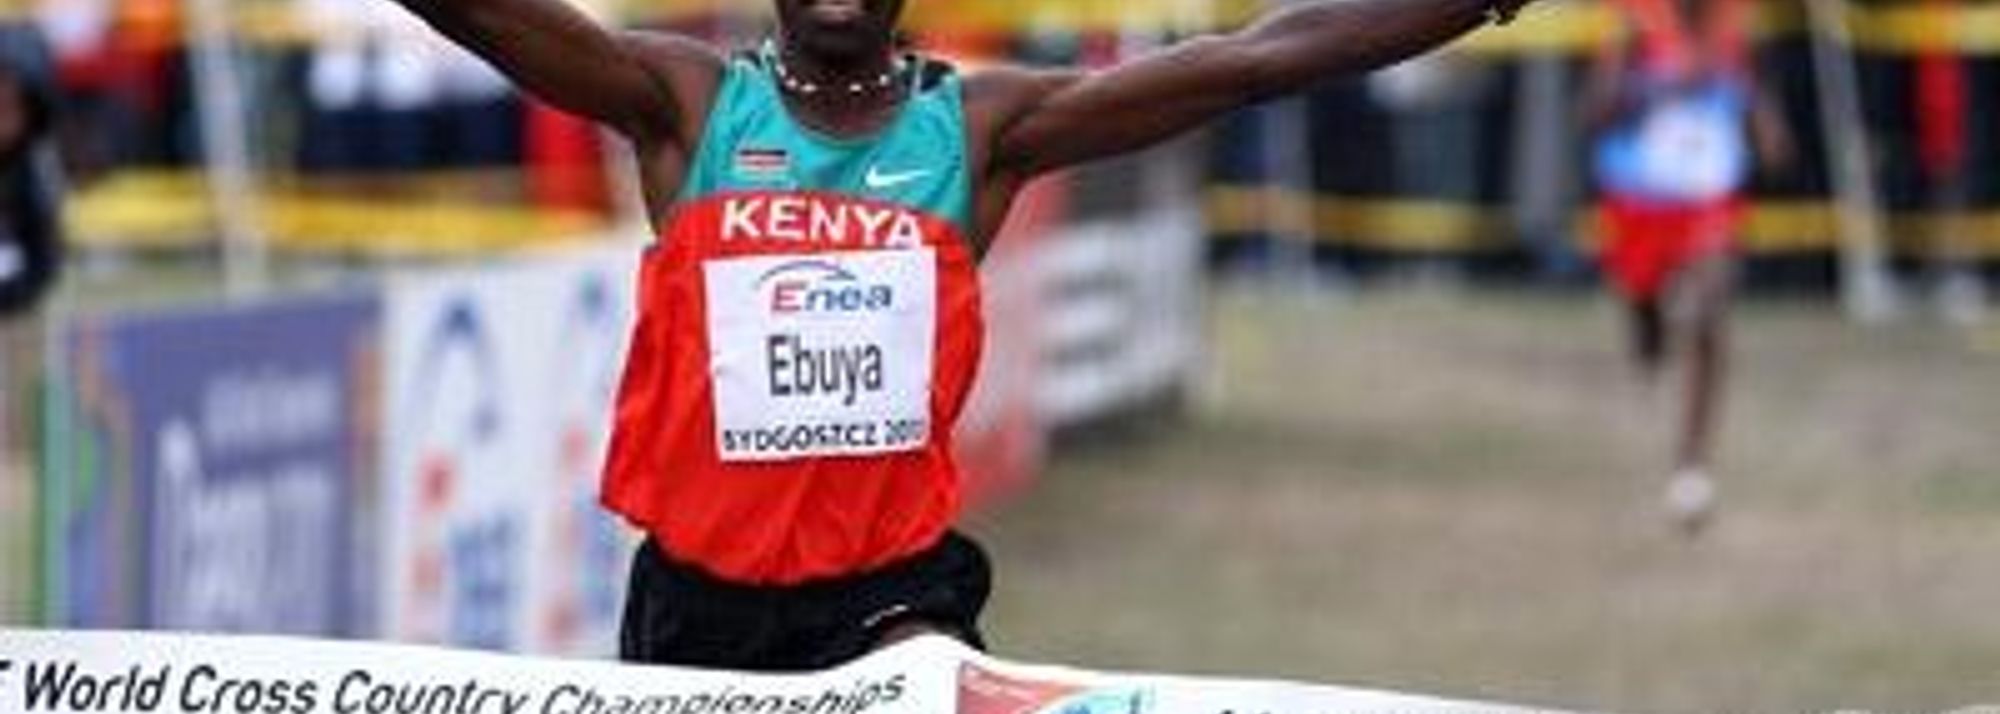 nbsp;- As the 136 starters from 39 countries set out for the race we already knew it was Kenya’s day with six out of six golds so far, while Ethiopia could point to three team silvers and a solitary individual bronze. </p>